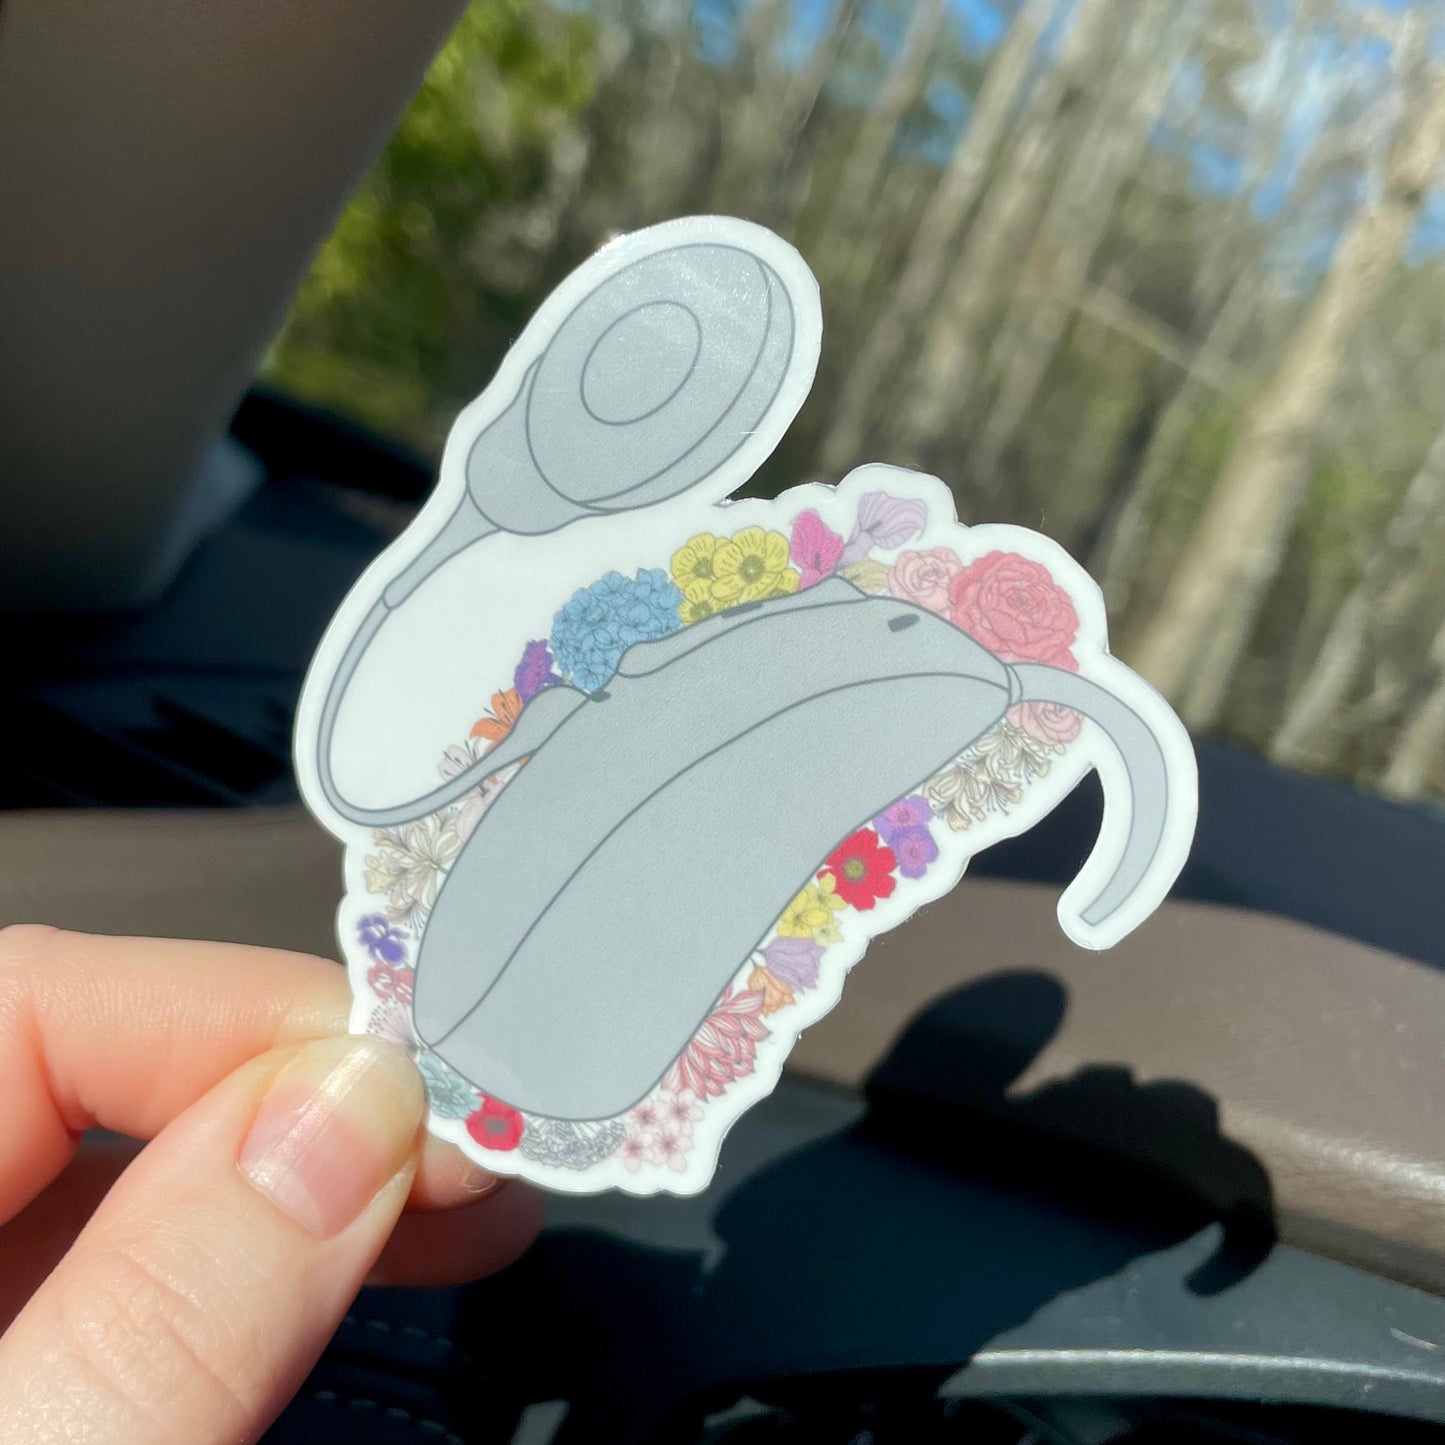 Floral Hearing Aid Sticker (Cochlear Implant) Waterproof/Dishwasher Safe